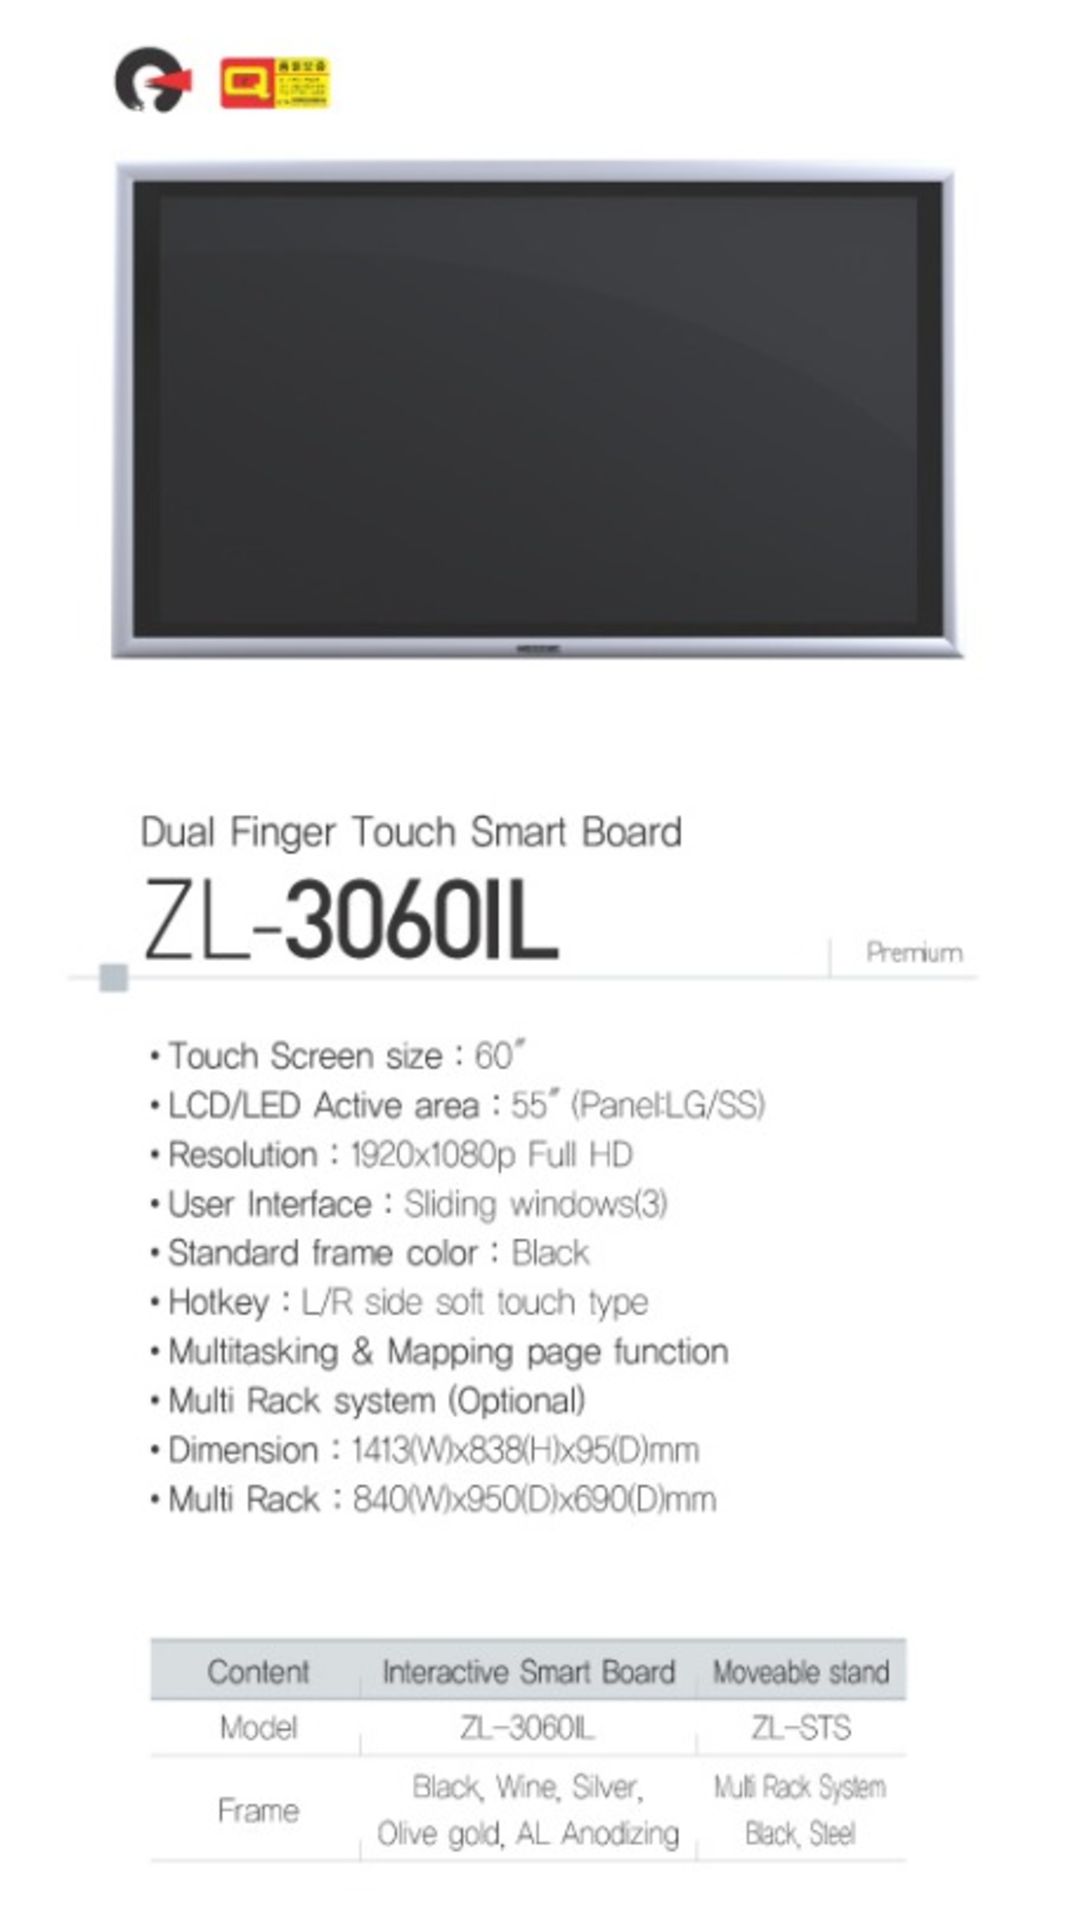 COMMBOX INTERACTIVE LED TOUCHPANEL MODEL: ZL-3060IL NEW IN THE BOX WITH WALL MOUNT - Check the video - Image 2 of 5